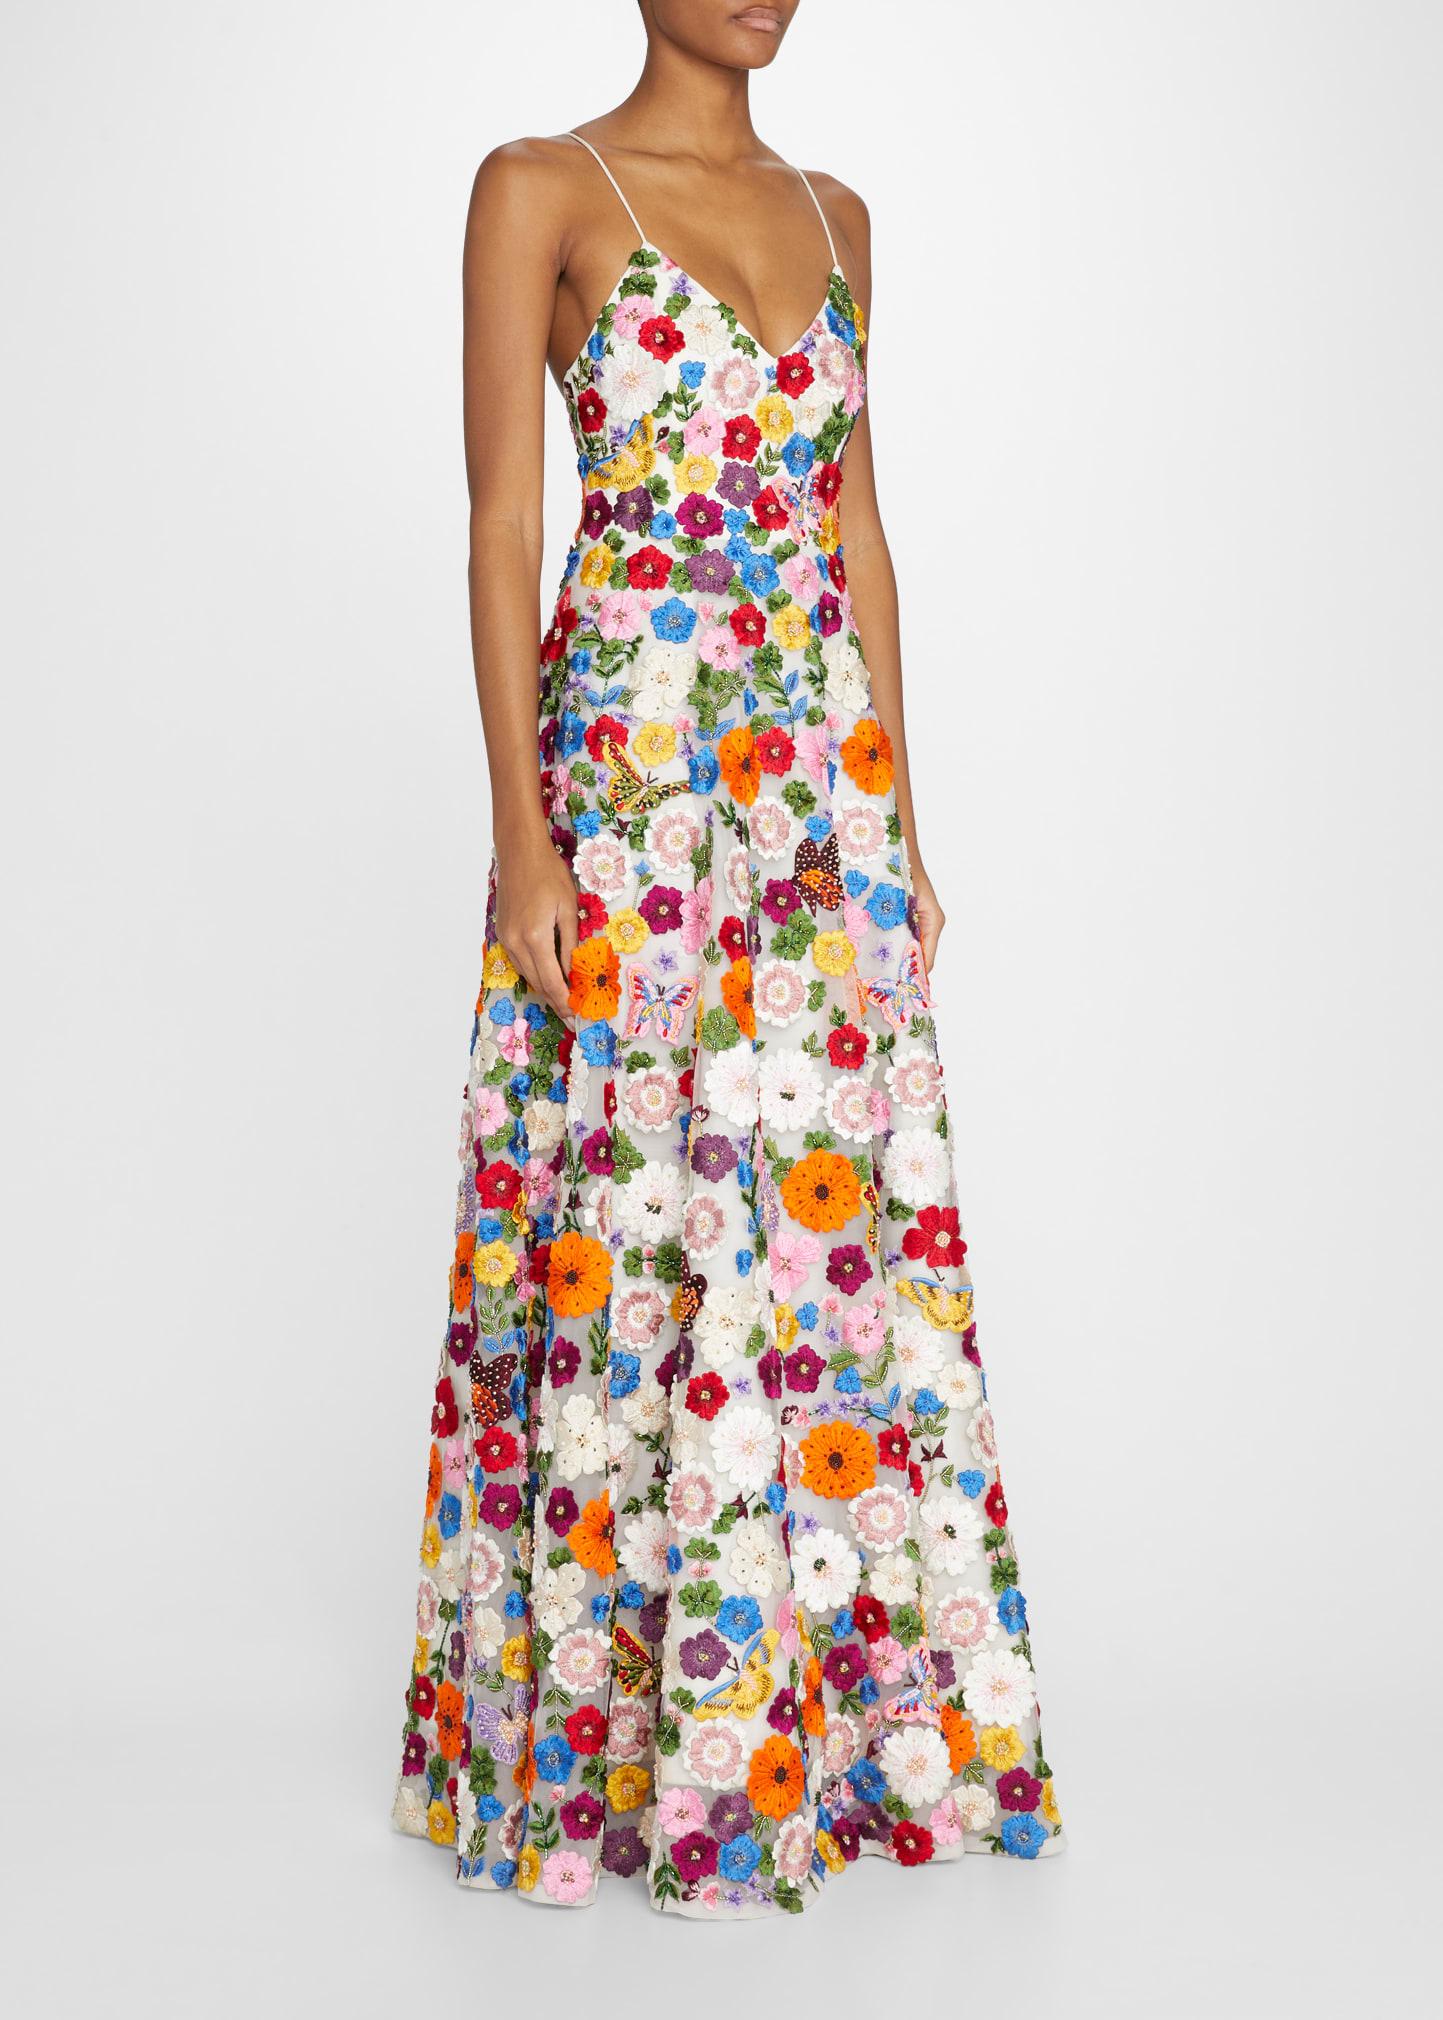 Alice + Olivia Domenica Embellished Floral Gown in White | Lyst